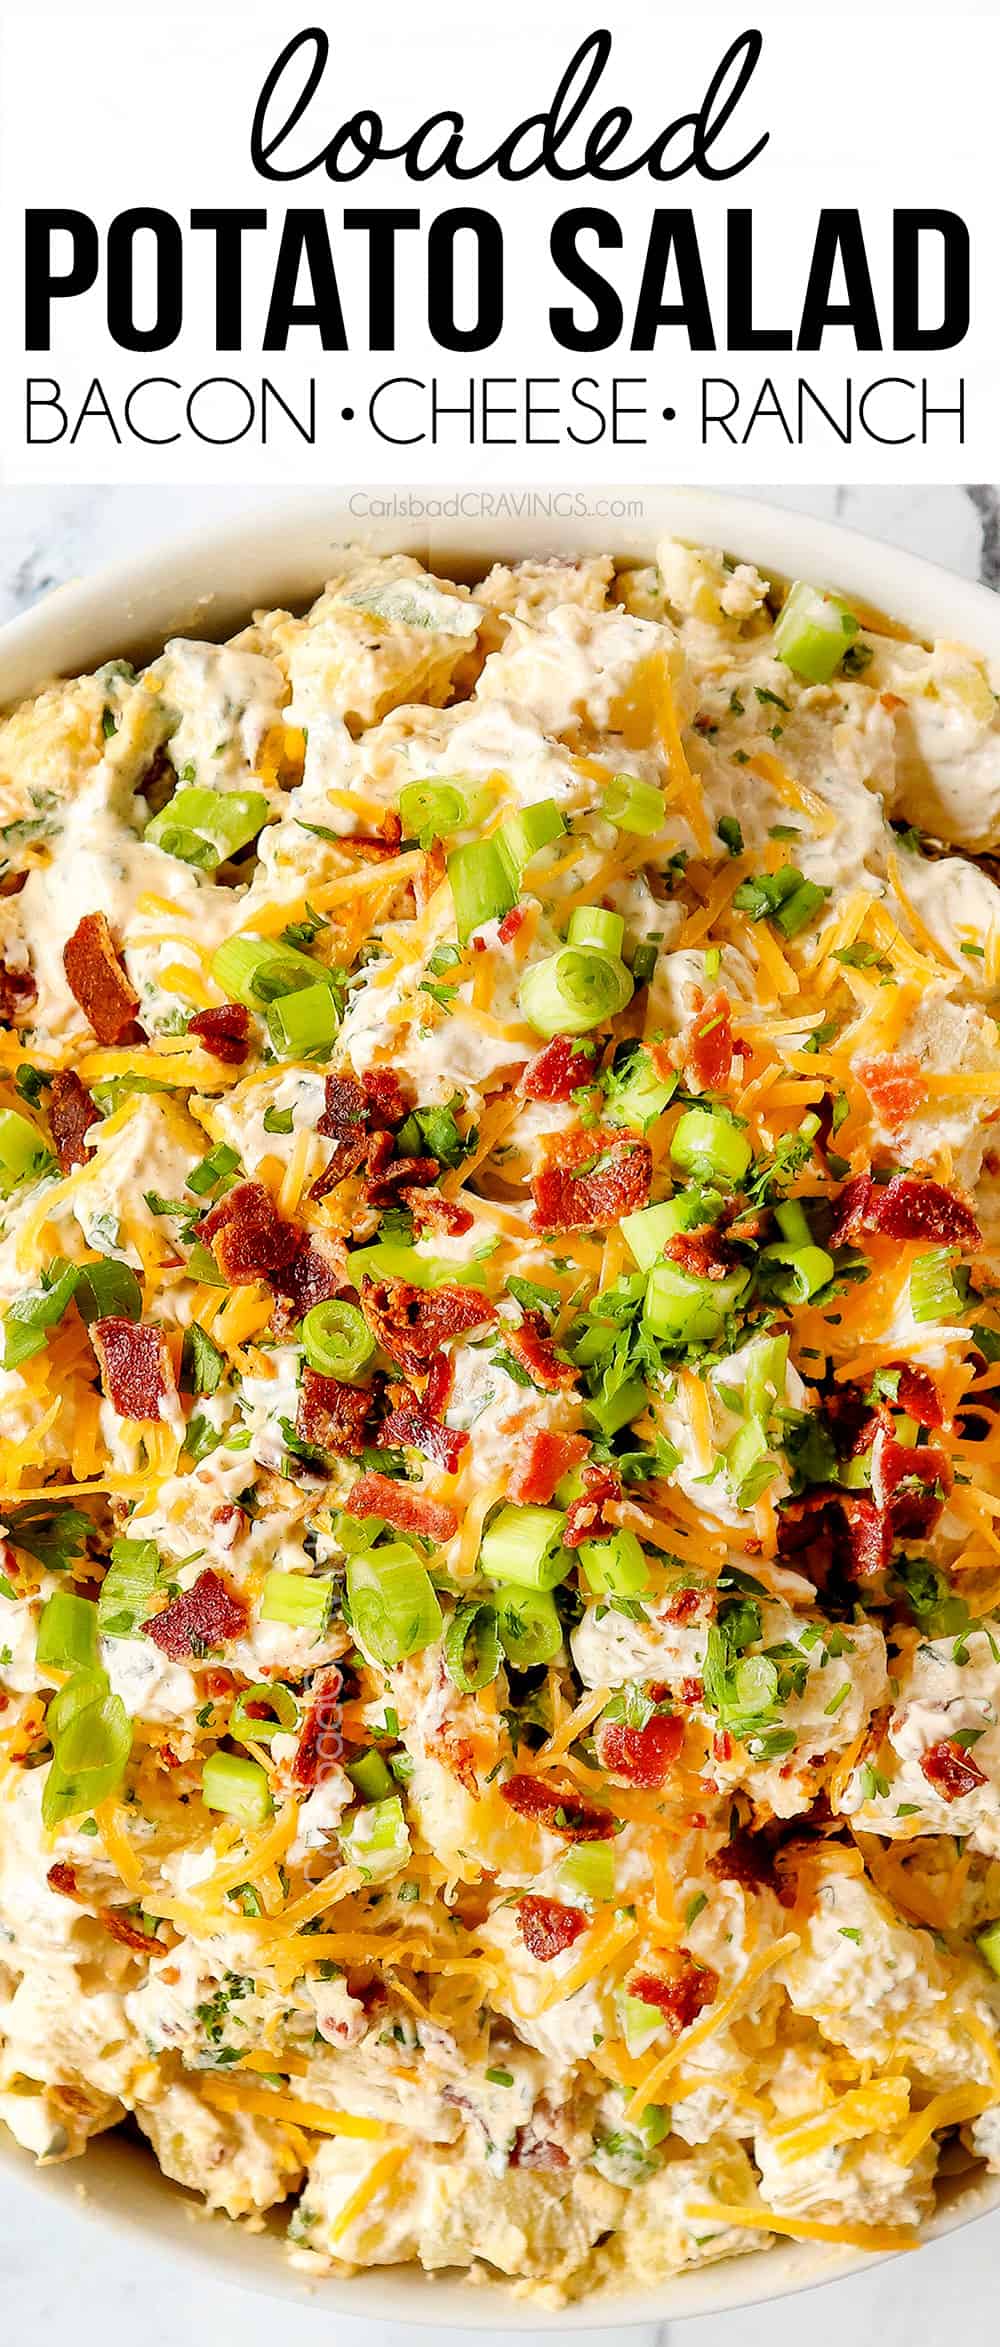 top view of loaded potato salad in a white bowl with bacon, cheese and chives